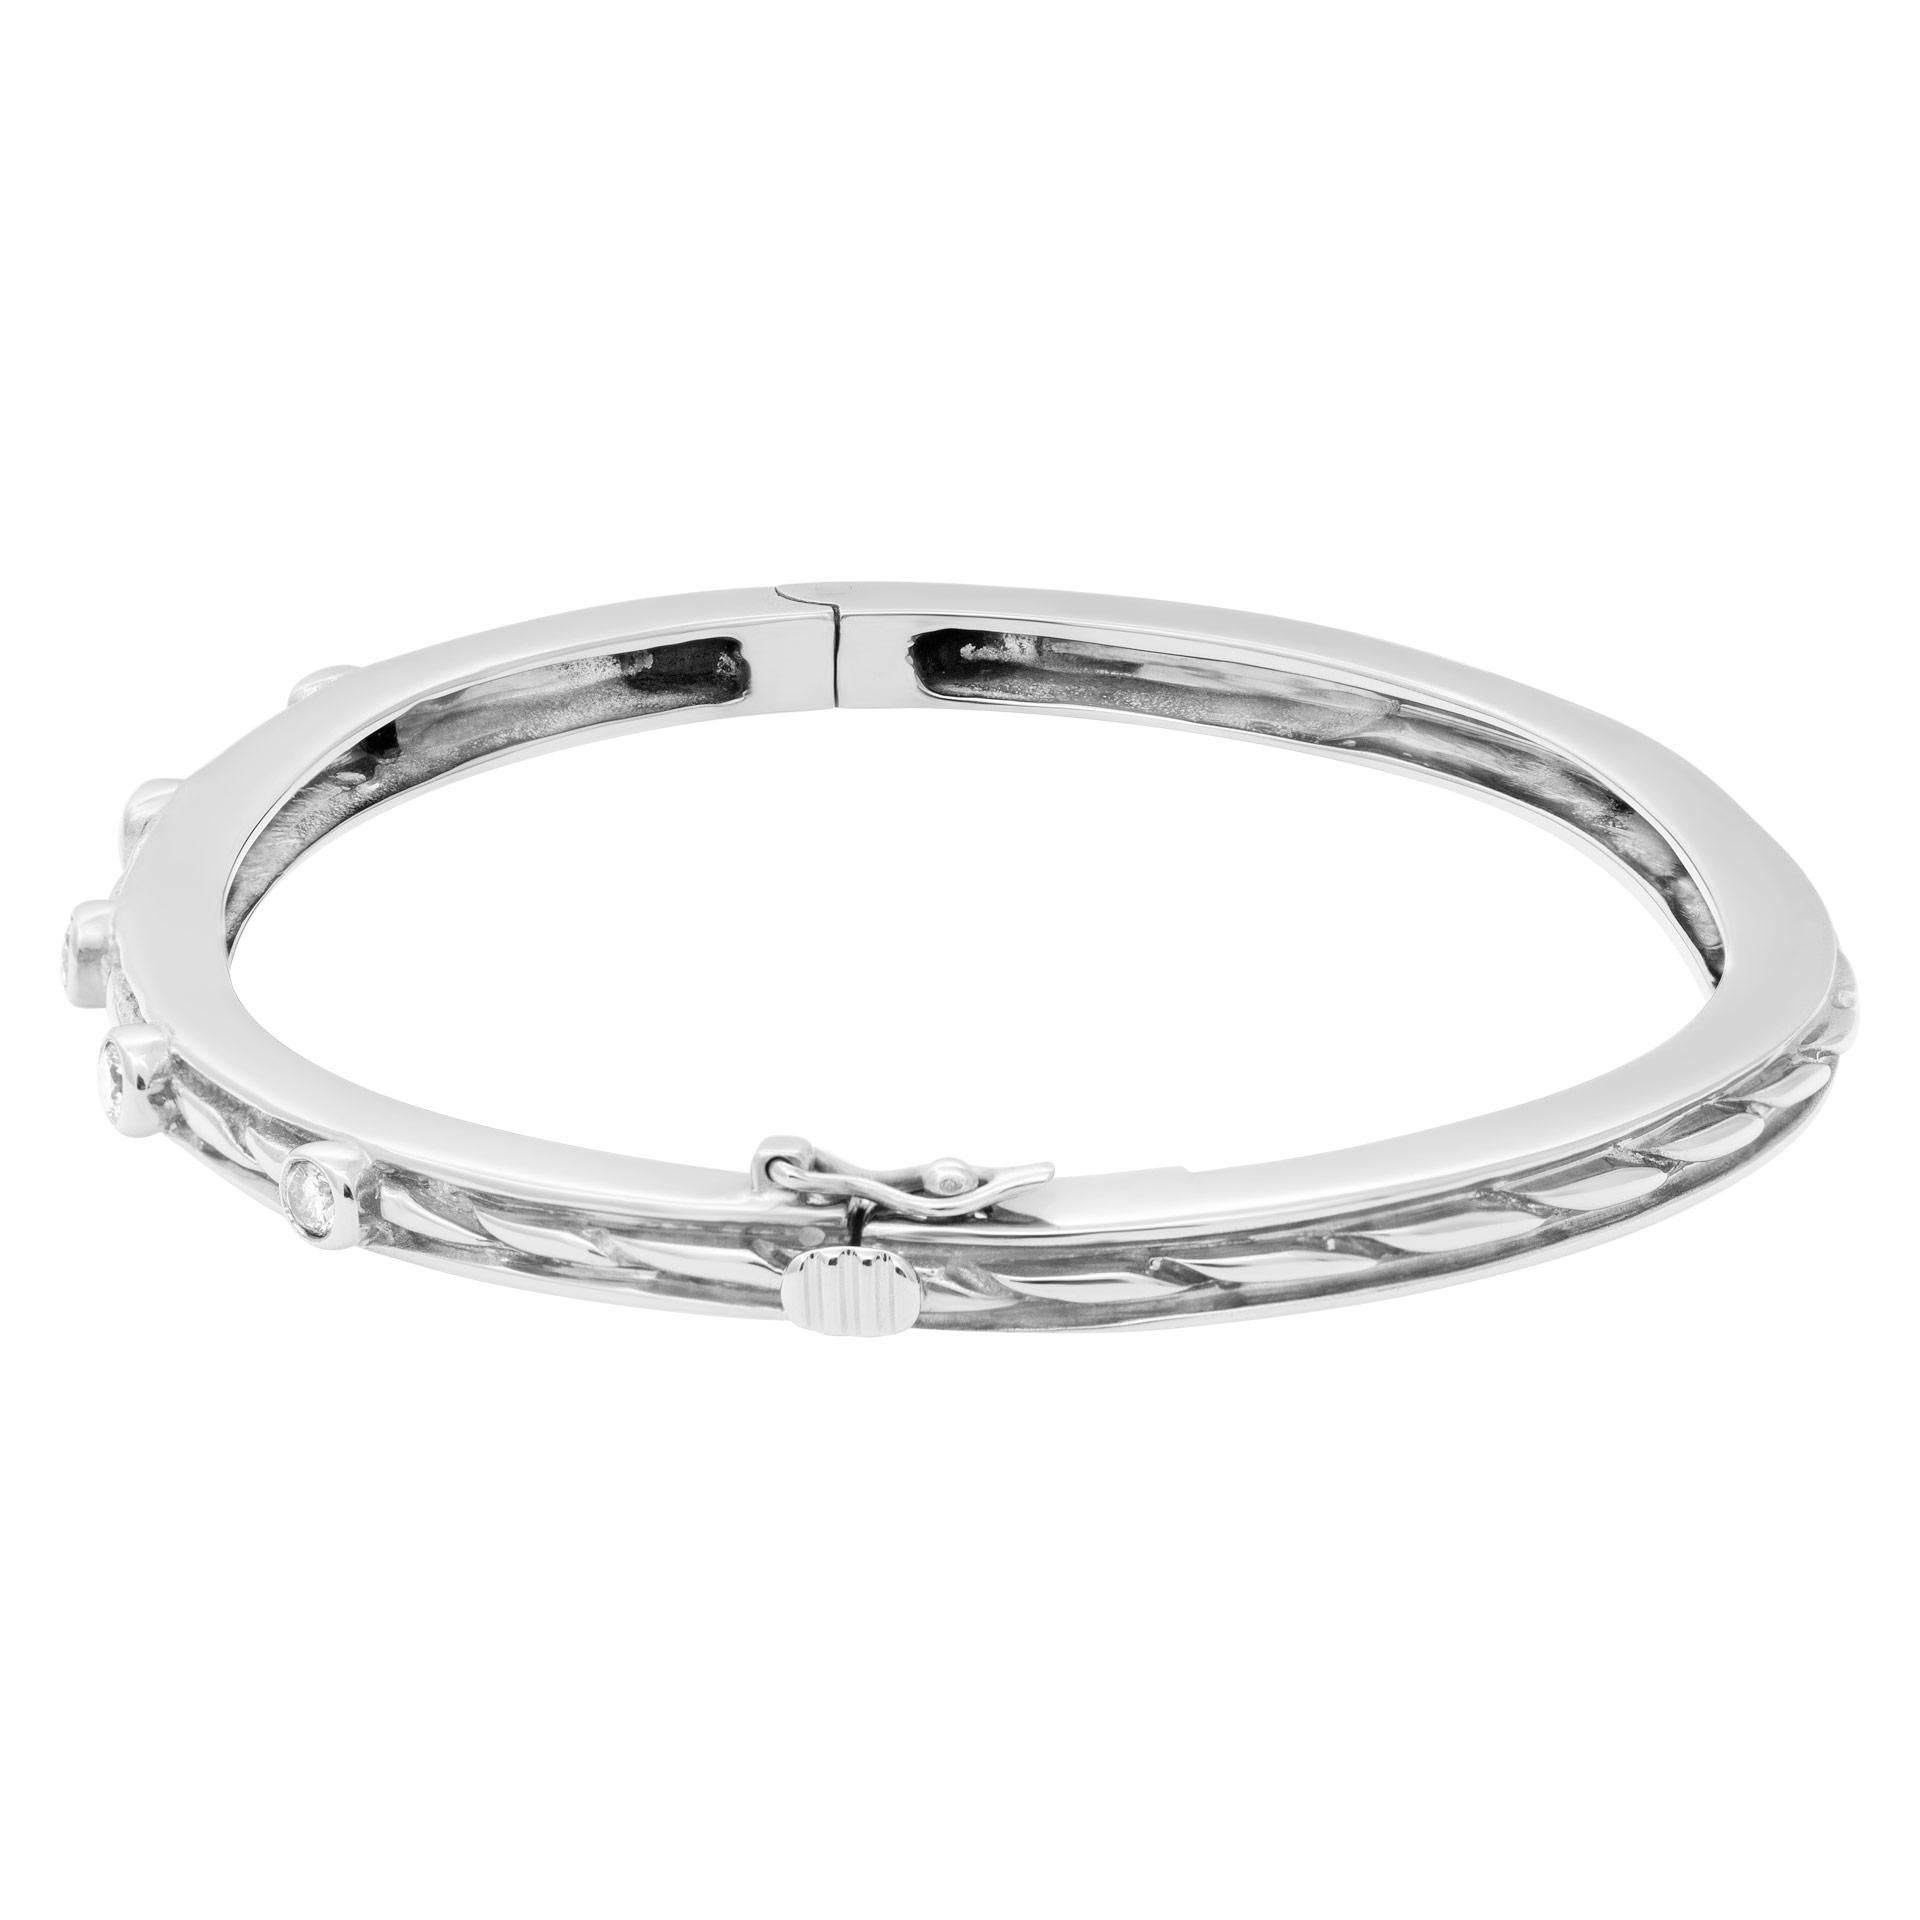 Beautiful bangle with five diamonds total 0.50 carats set in 14k white gold. Fits 6.5-7 inches wrist. Width 3.5mm.
